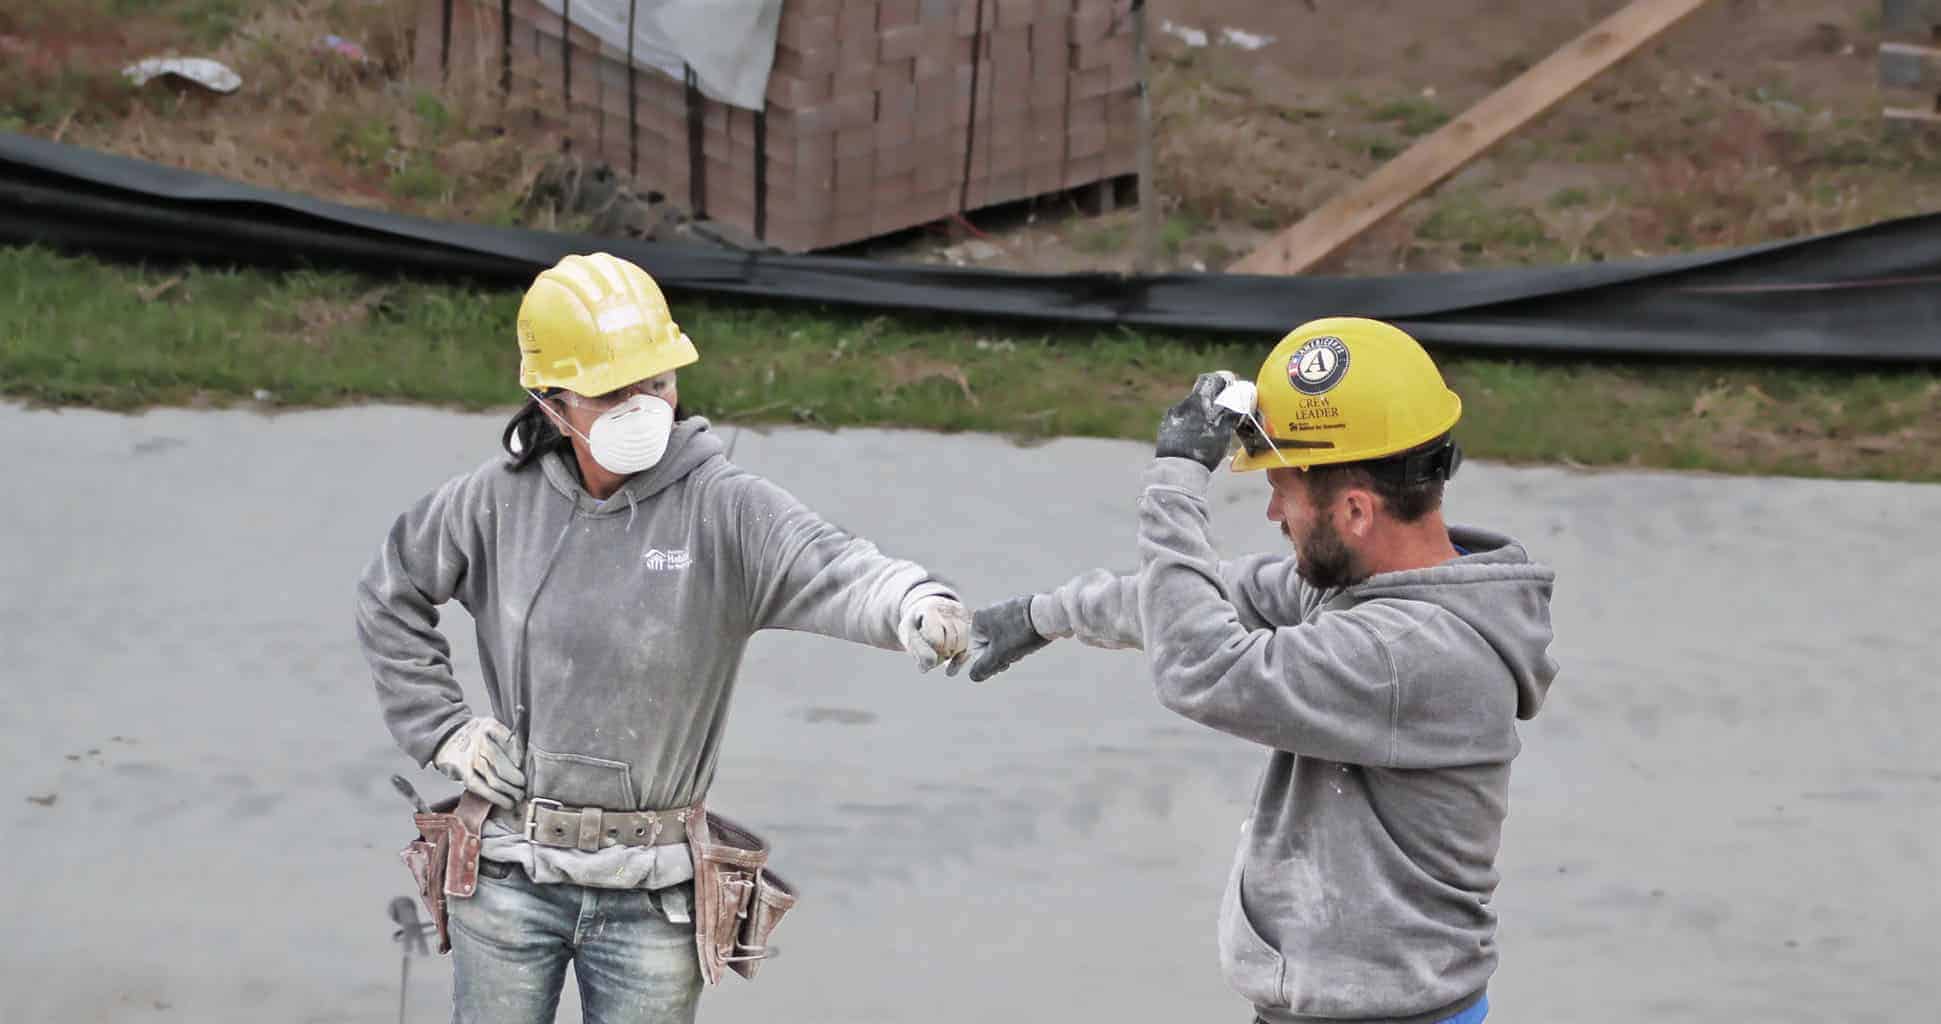 Two people in hard hats fist-bumping